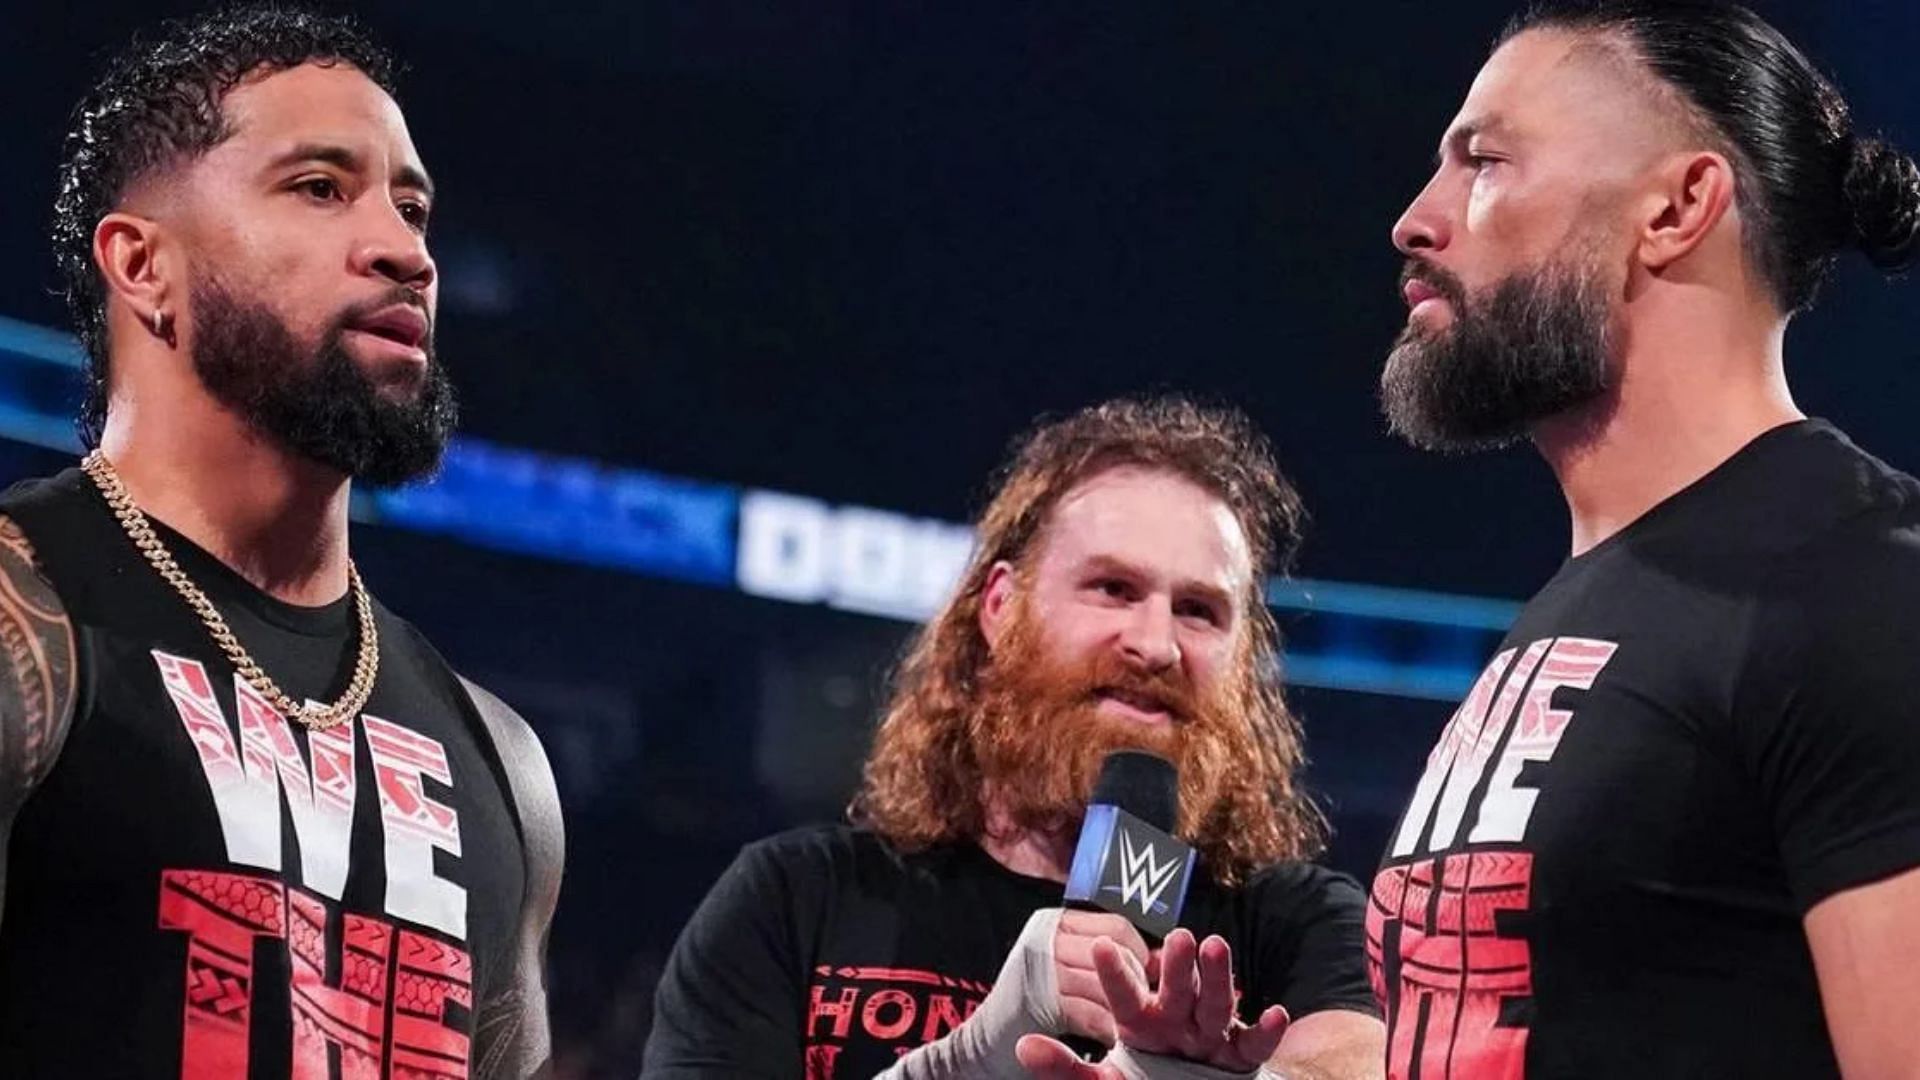 Jey Uso, Sami Zayn, and Roman Reigns are must-watch television on SmackDown